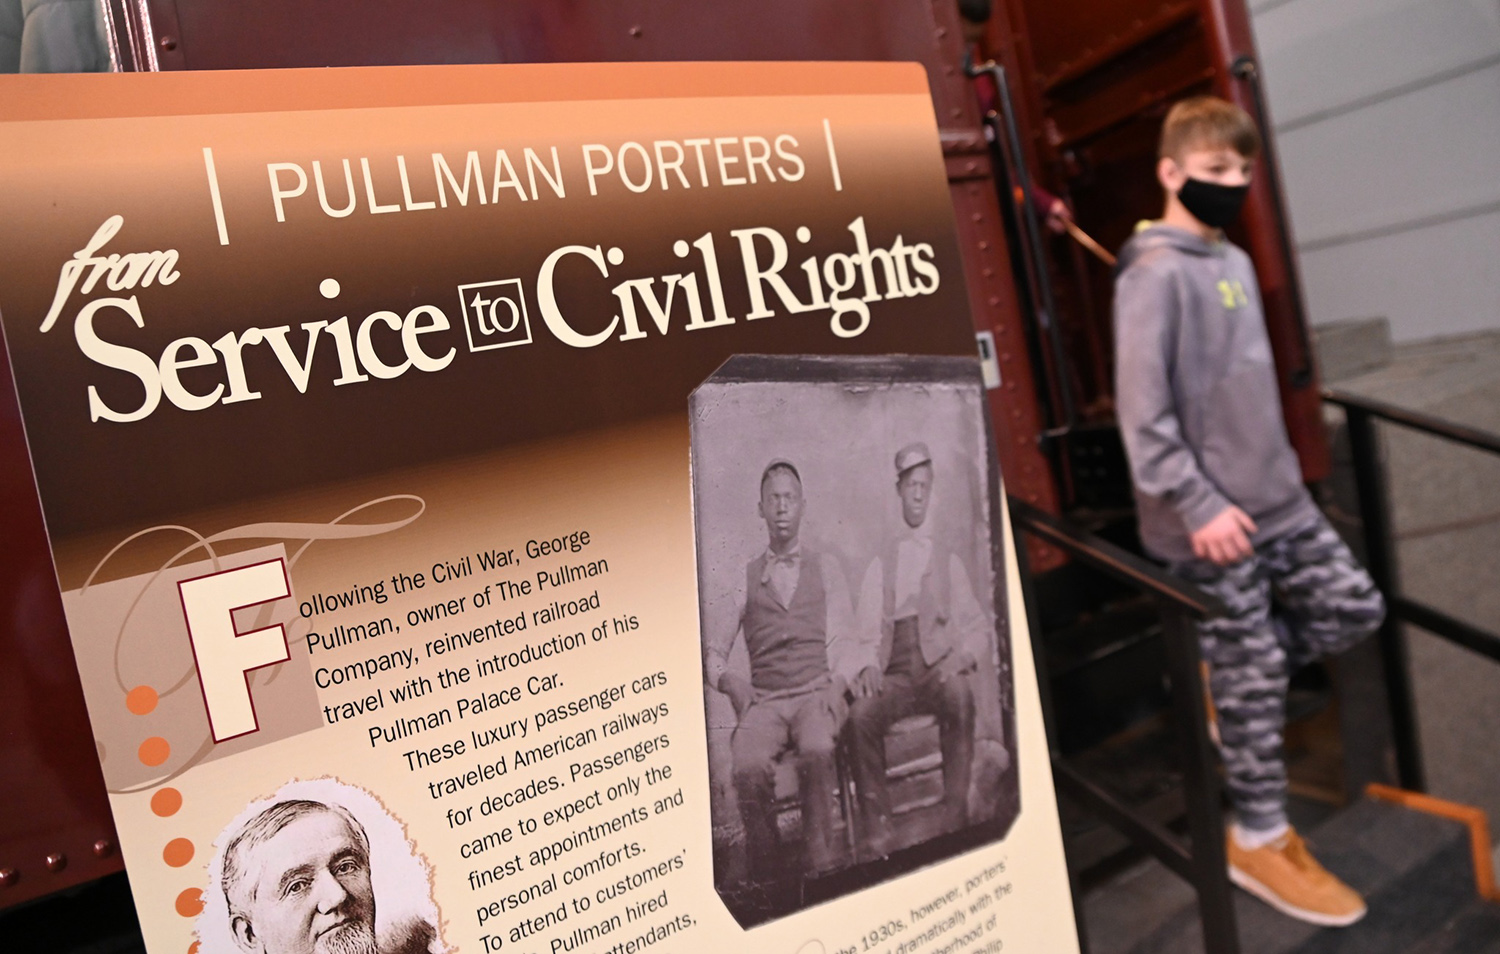 Pullman Porters: From Service to Civil Rights